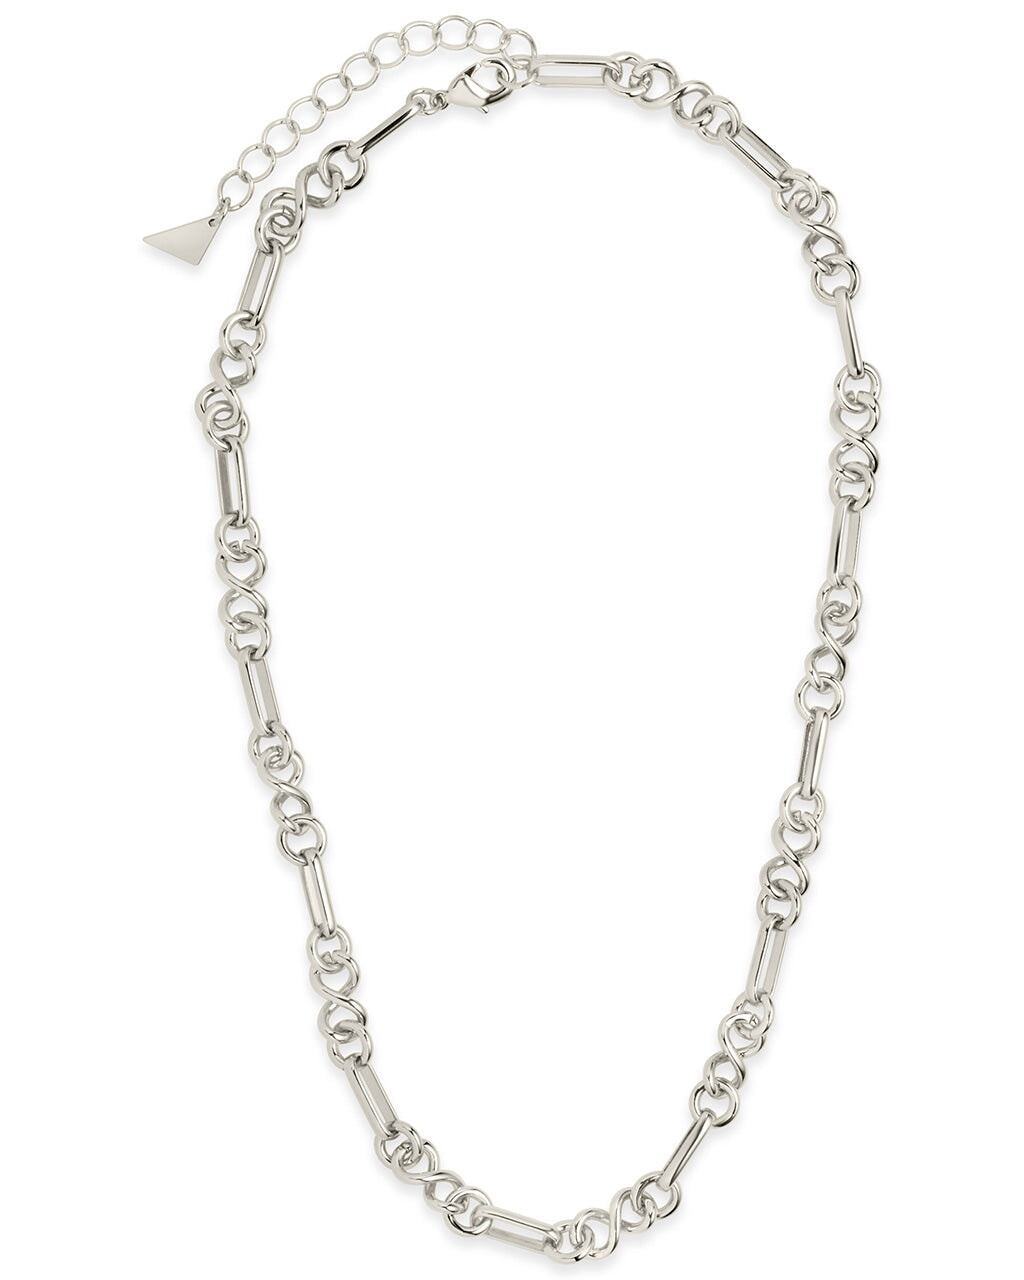 Infinity & Oval Link Chain Necklace